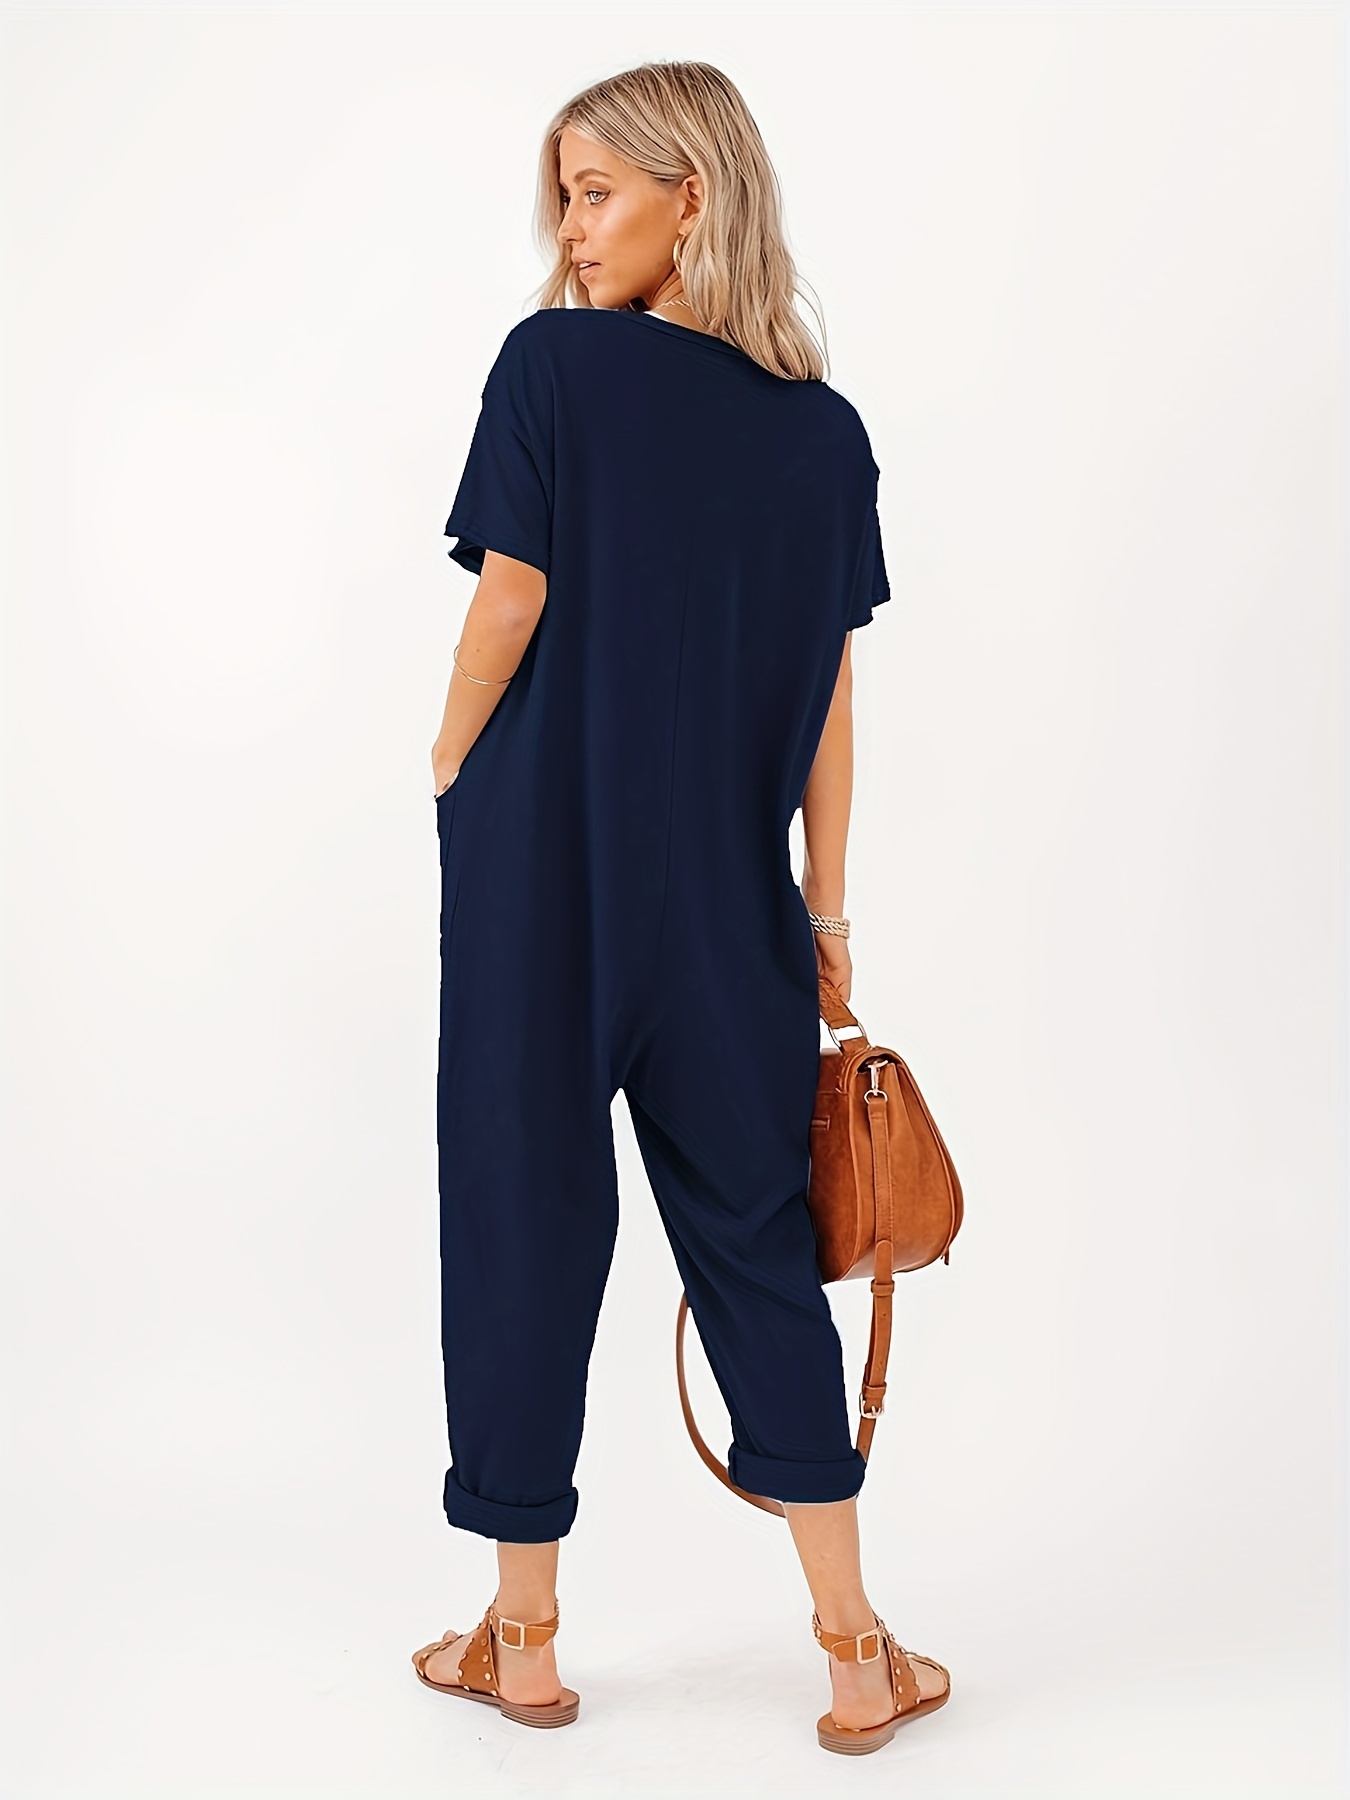 Women Summer Short Sleeve Jumpsuit Wrap V Neck Chiffon Rompers Solid Color  Casual Loose Cap Sleeve Playsuit 